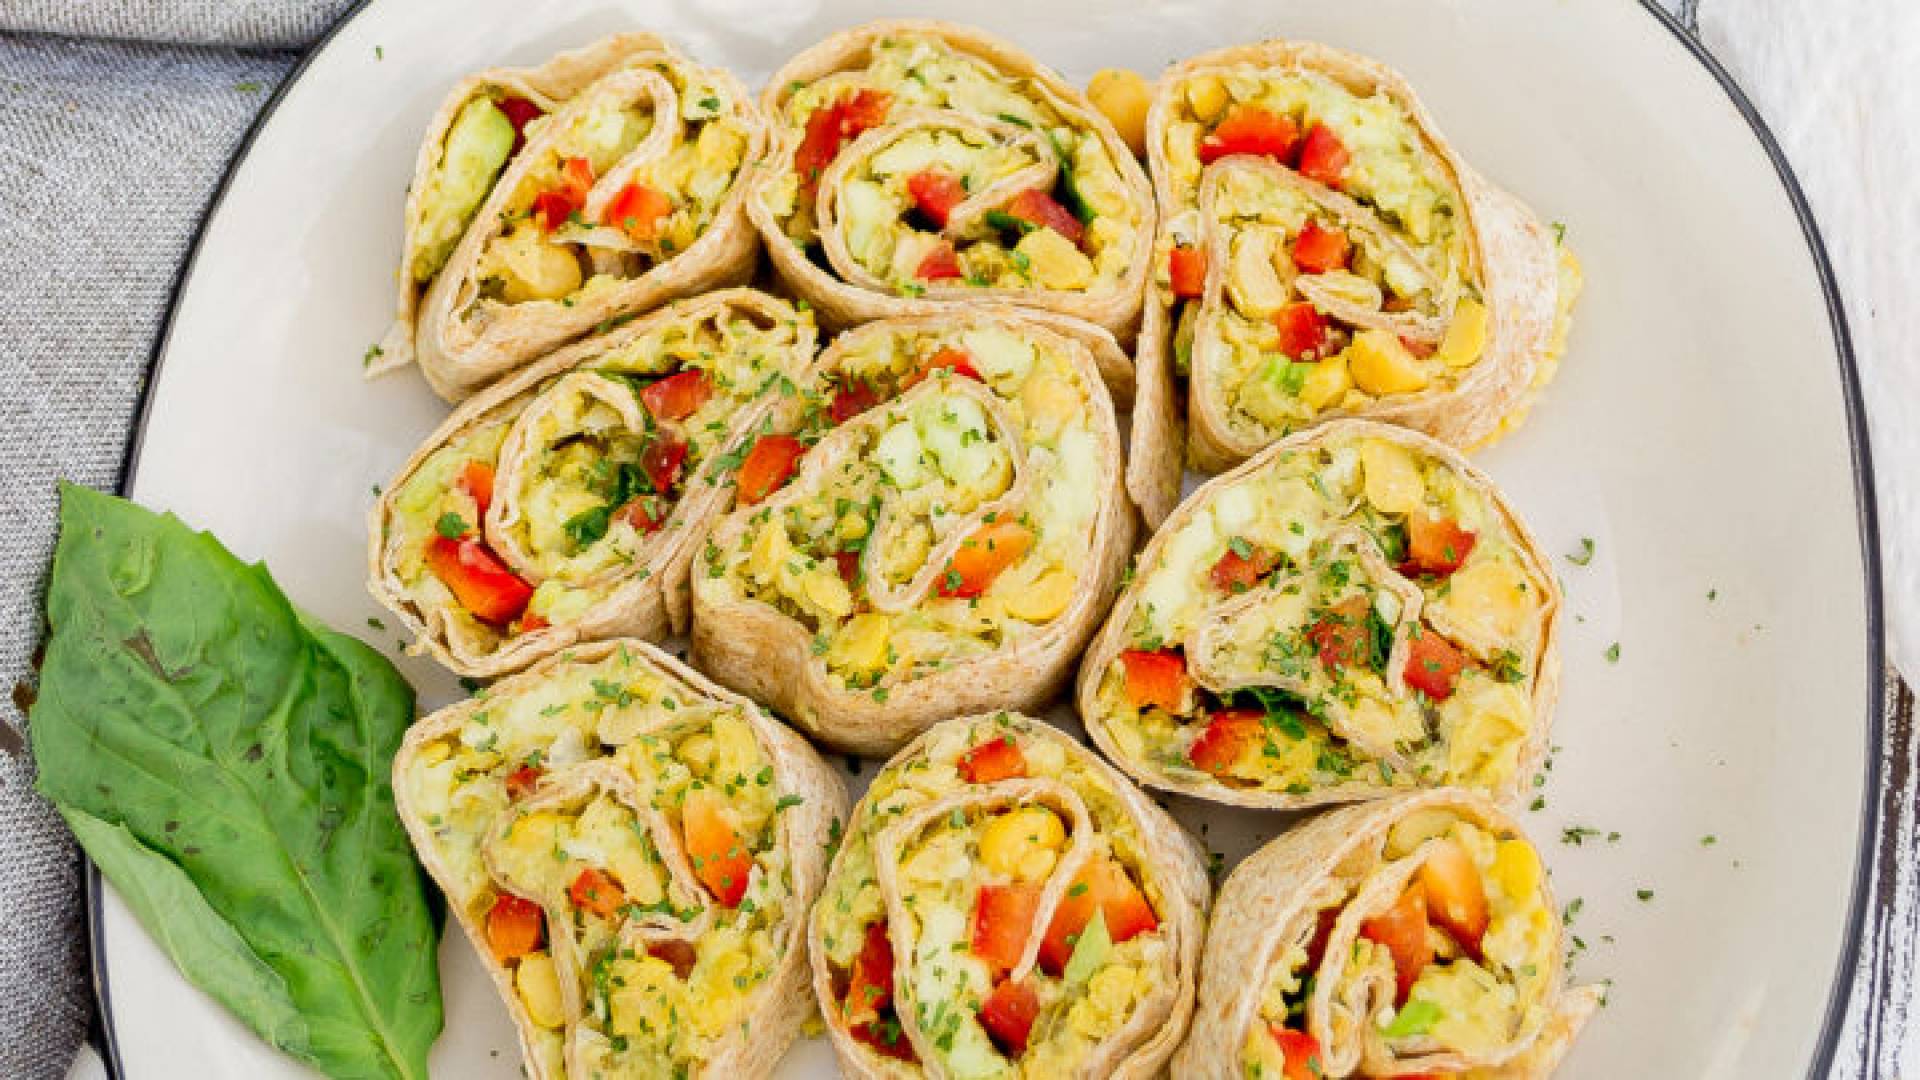 Curry Chickpea Salad Wrap